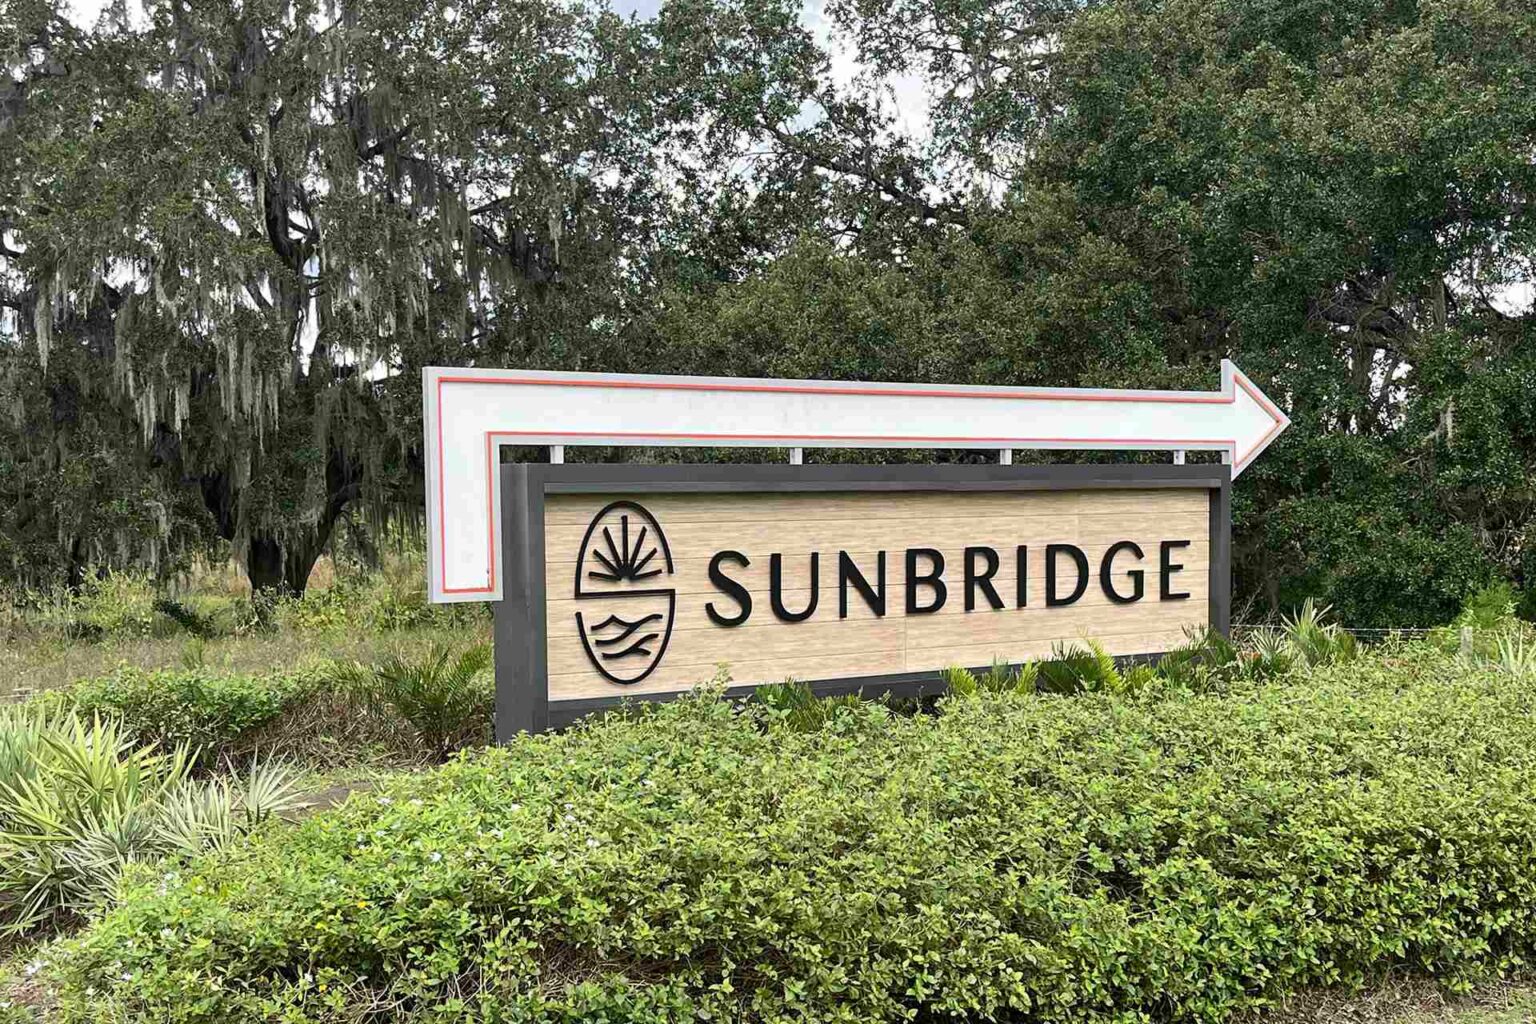 Sunbridge Entrance Sign at Cyrils Dr and N Narcoosee Rd. Sunbridge contributes to the St Cloud Florida Real Estate boom and is the largest new home construction development.